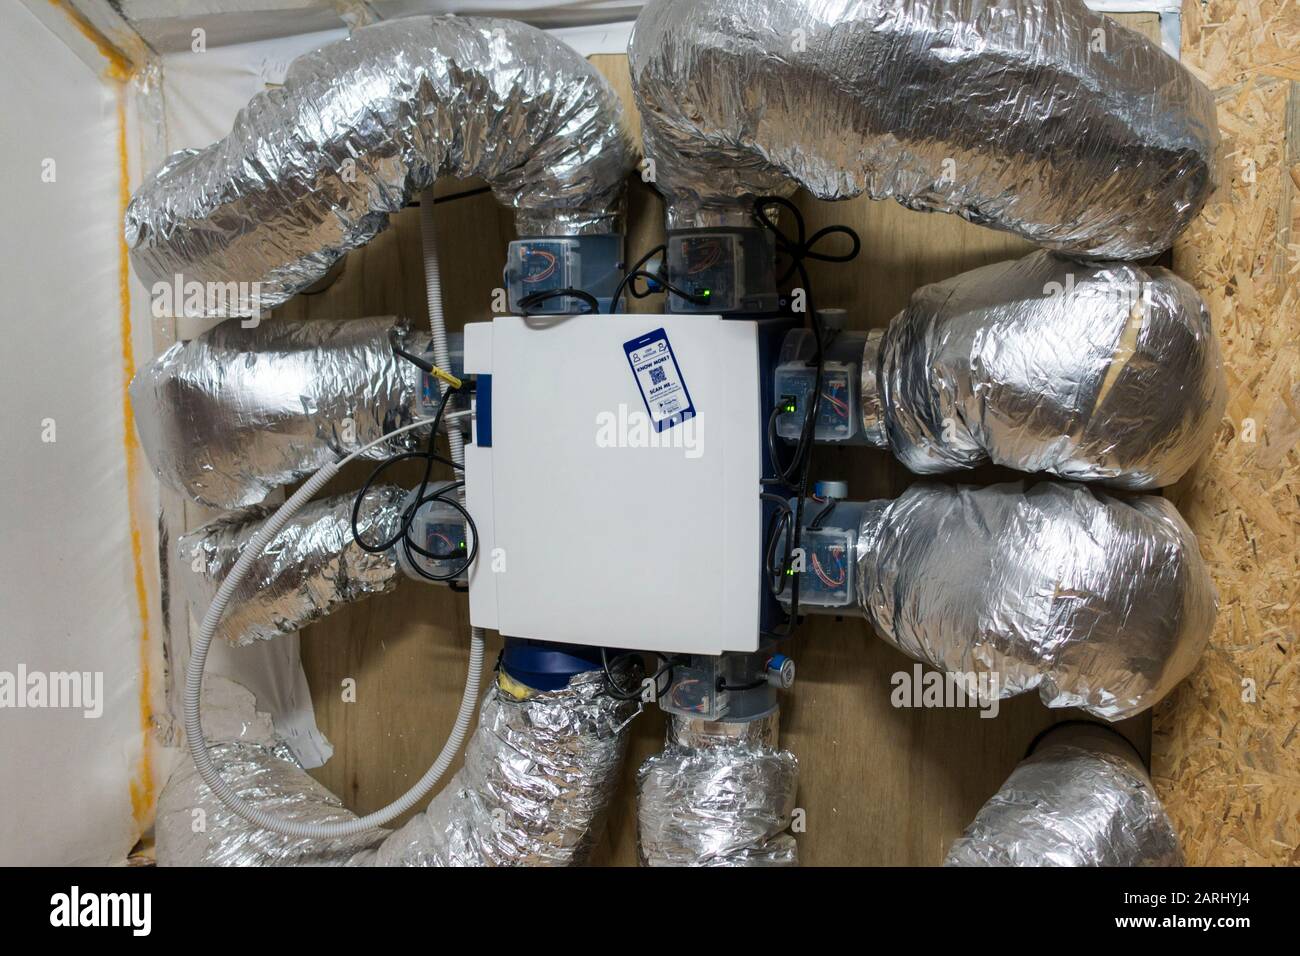 Renson Healthbox 3.0, domestic individual ventilation system showing control modules and air ducts Stock Photo